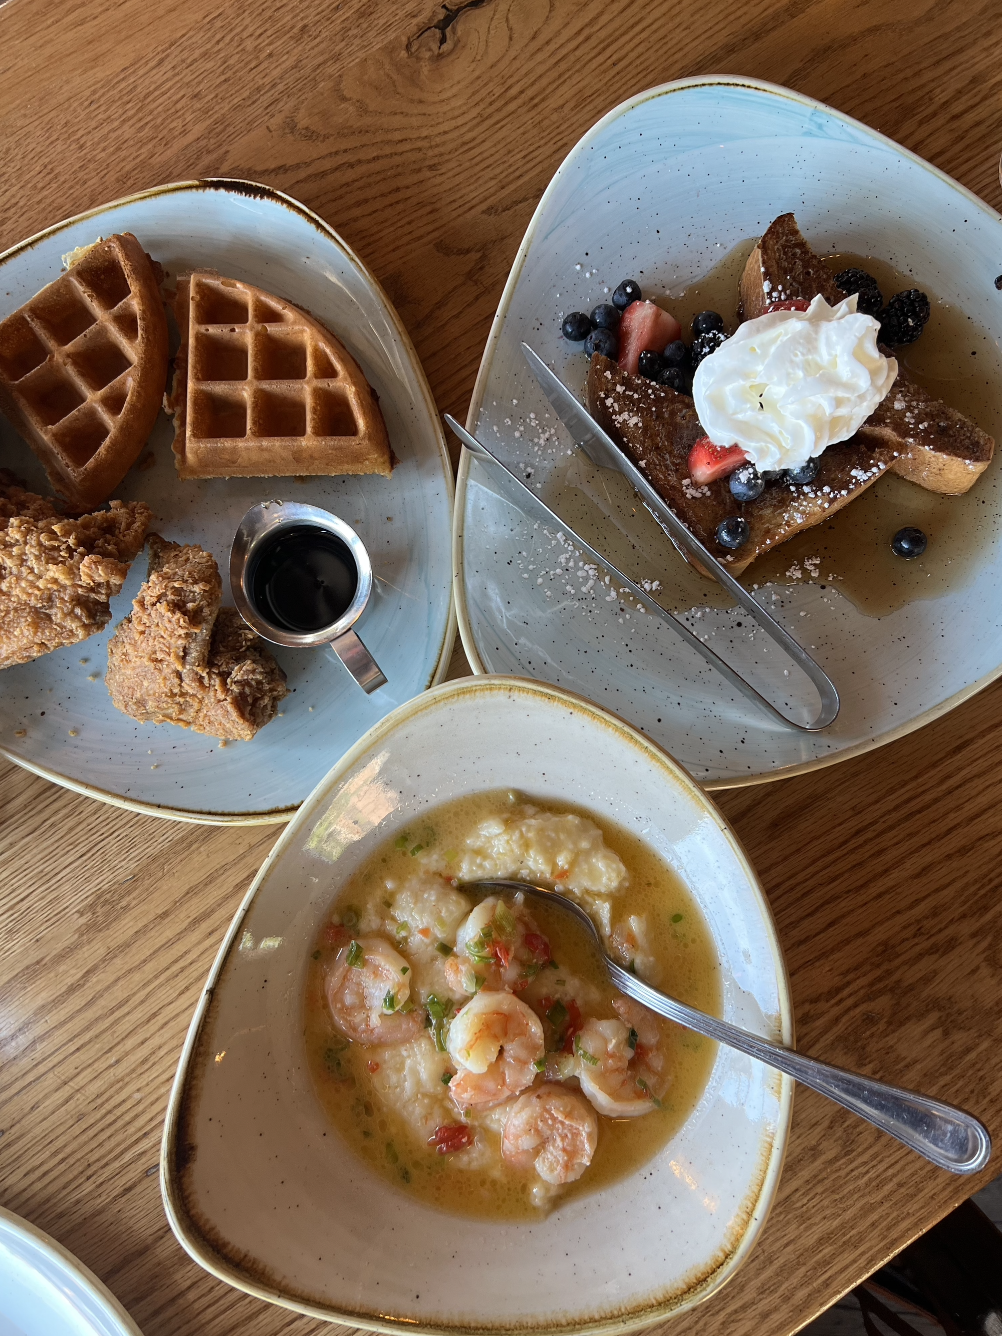 A brunch spread with chicken and waffles, shrimp and grits, and French toast.